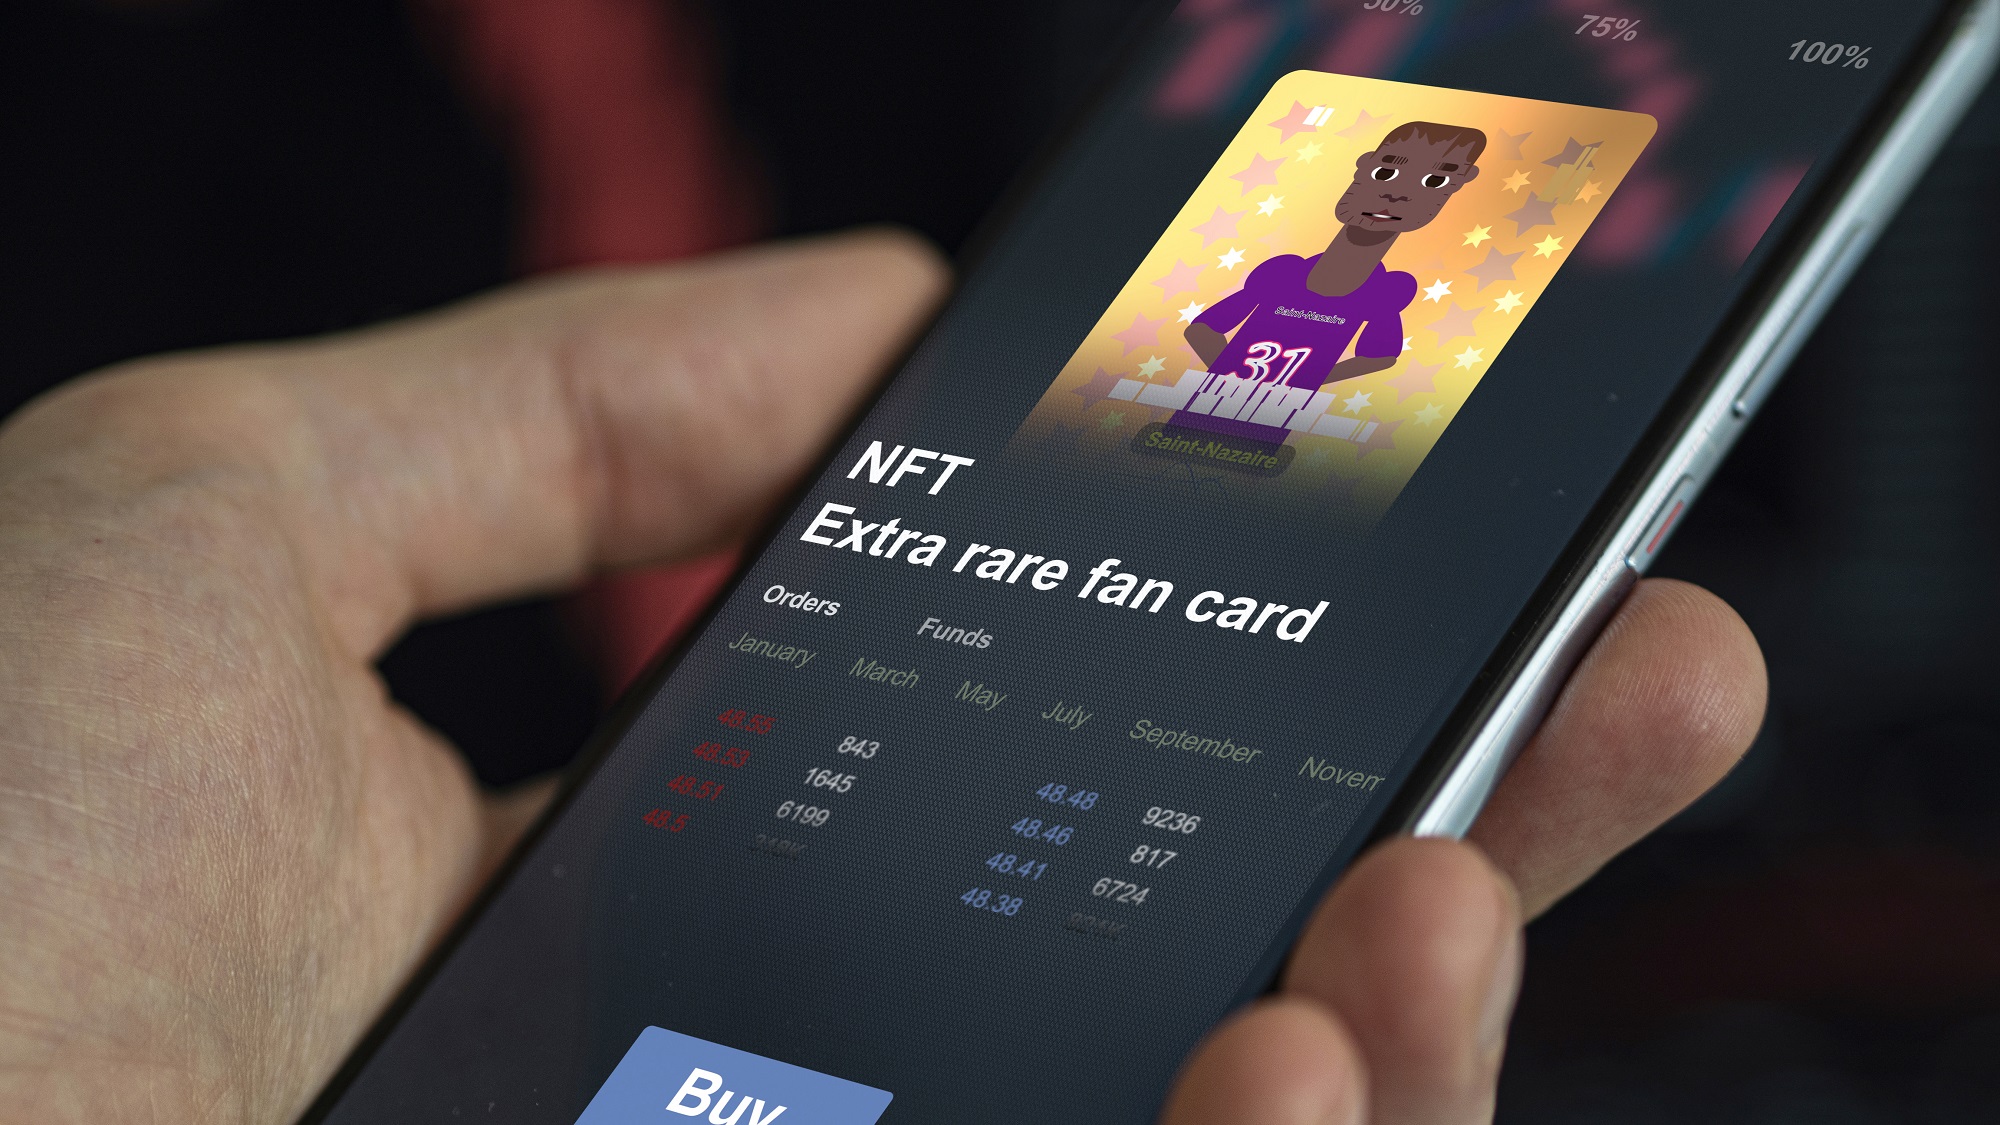 A smartphone user holds a device with an image of a sports player on it. Text reading &amp;amp;ldquo;NFT Extra Rare Fan Card&amp;amp;rdquo; is displayed below the image, along with a &amp;amp;ldquo;Buy&amp;amp;rdquo; button.